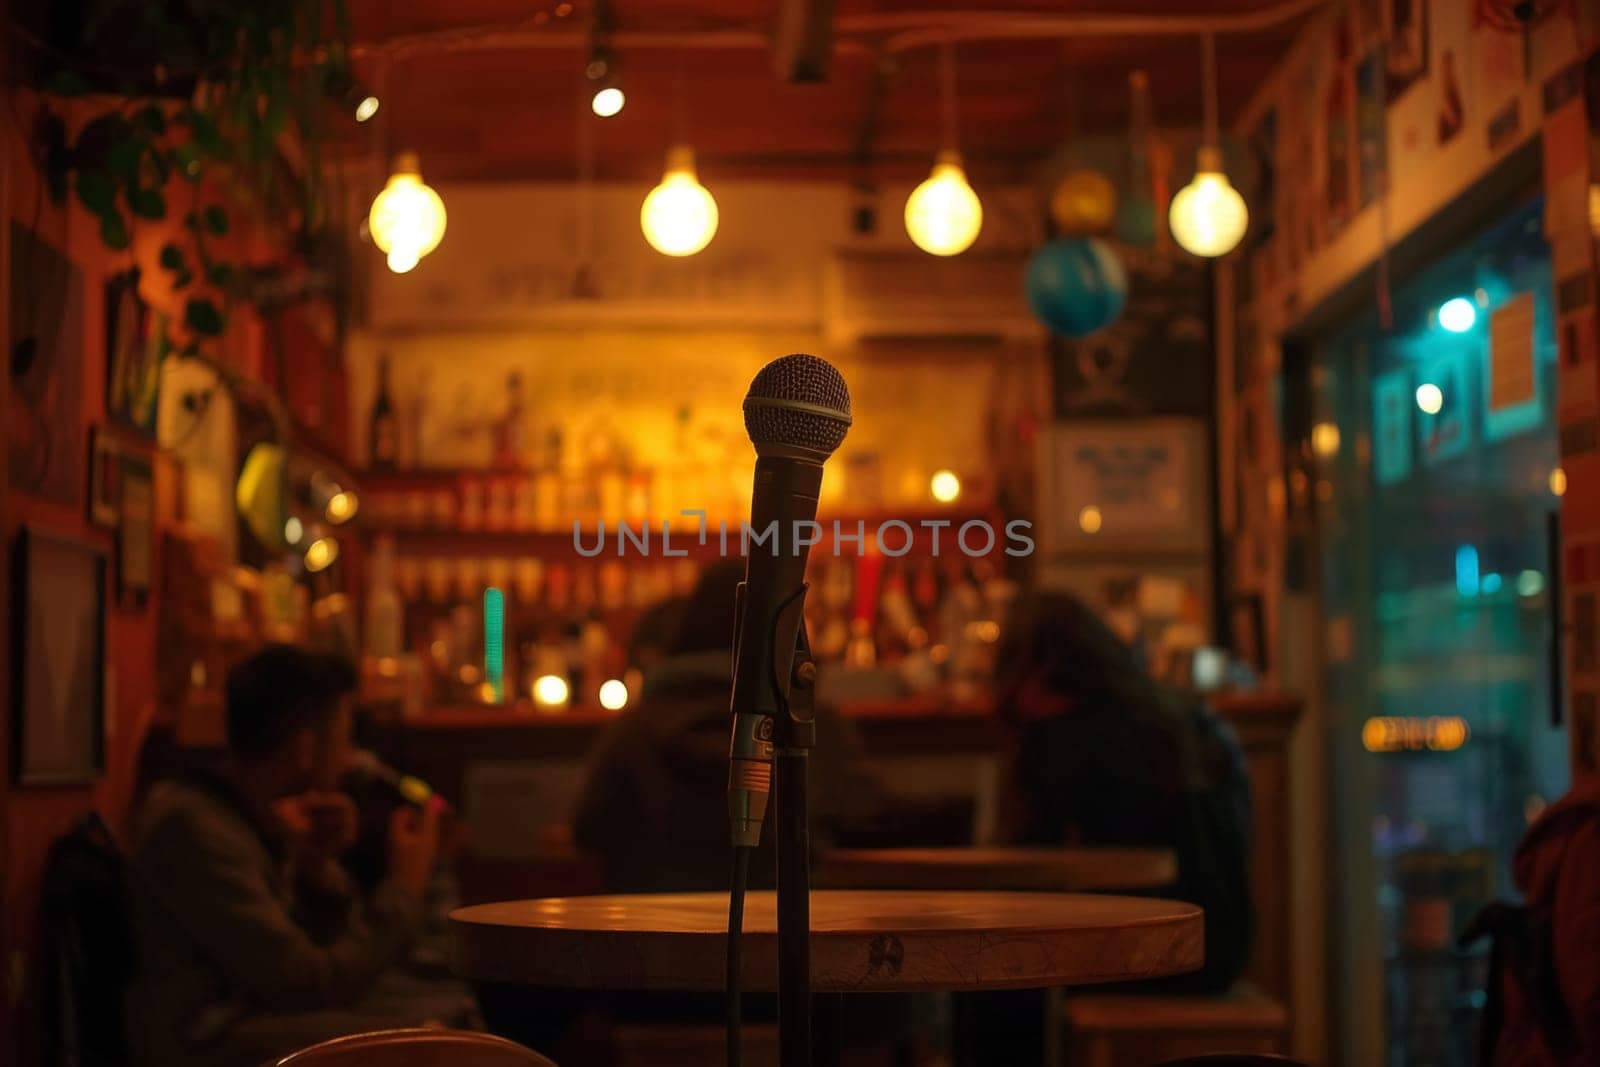 A microphone stands ready in a warm, inviting cafe setting, anticipating the thrum of a lively poetry slam event